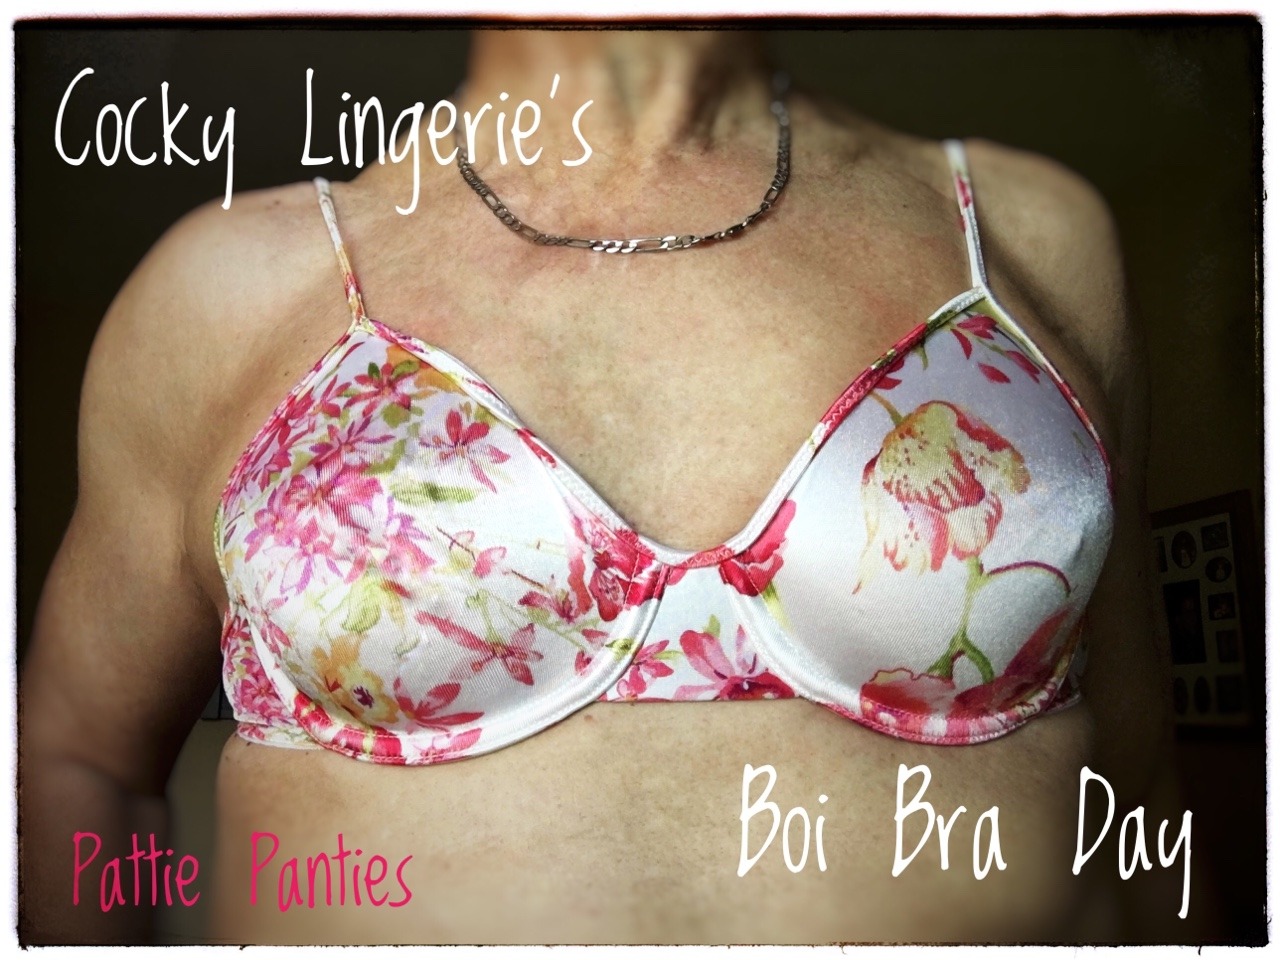 Porn Cocky Lingerie’s Boi Bra Day starts now.Wearing photos